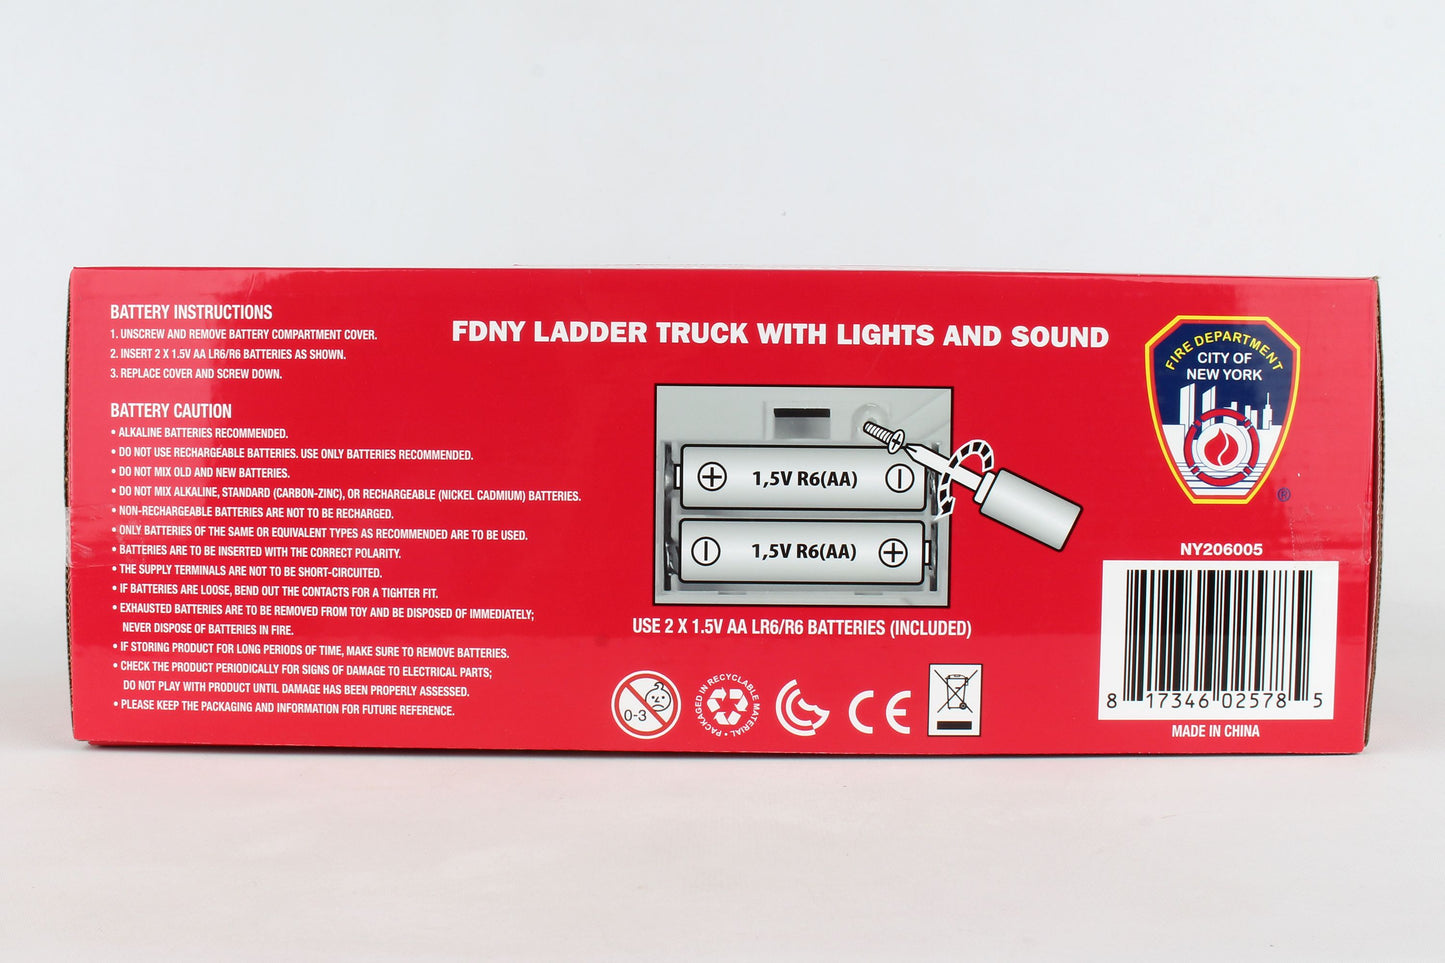 FDNY fire truck lights and sounds